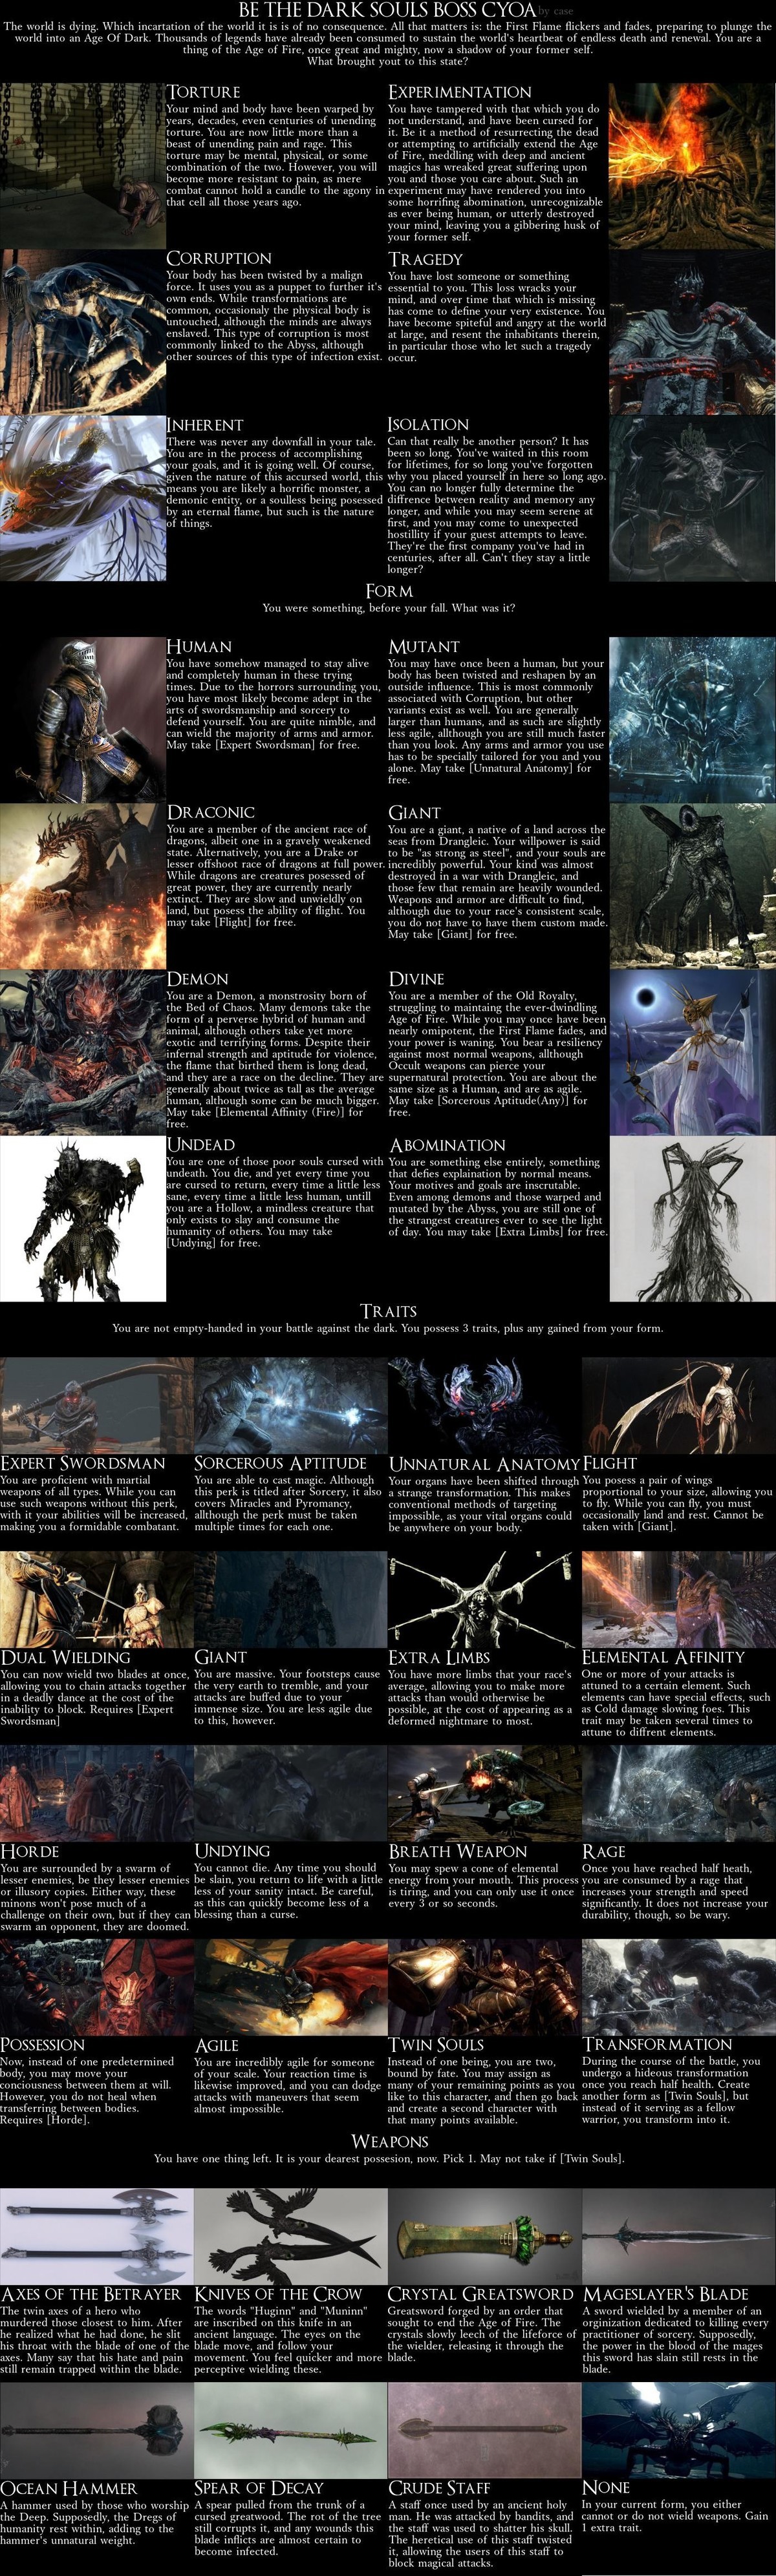 Be The Dark Souls Boss CYOA. Source join list: KnightWaifu (998 subs)Mention History join list:. Tragedy Human (gain expert swordsman) Rage Agile Giant extra trait as zwei is life: Elemental Affinity - frost damage to hurt stamina